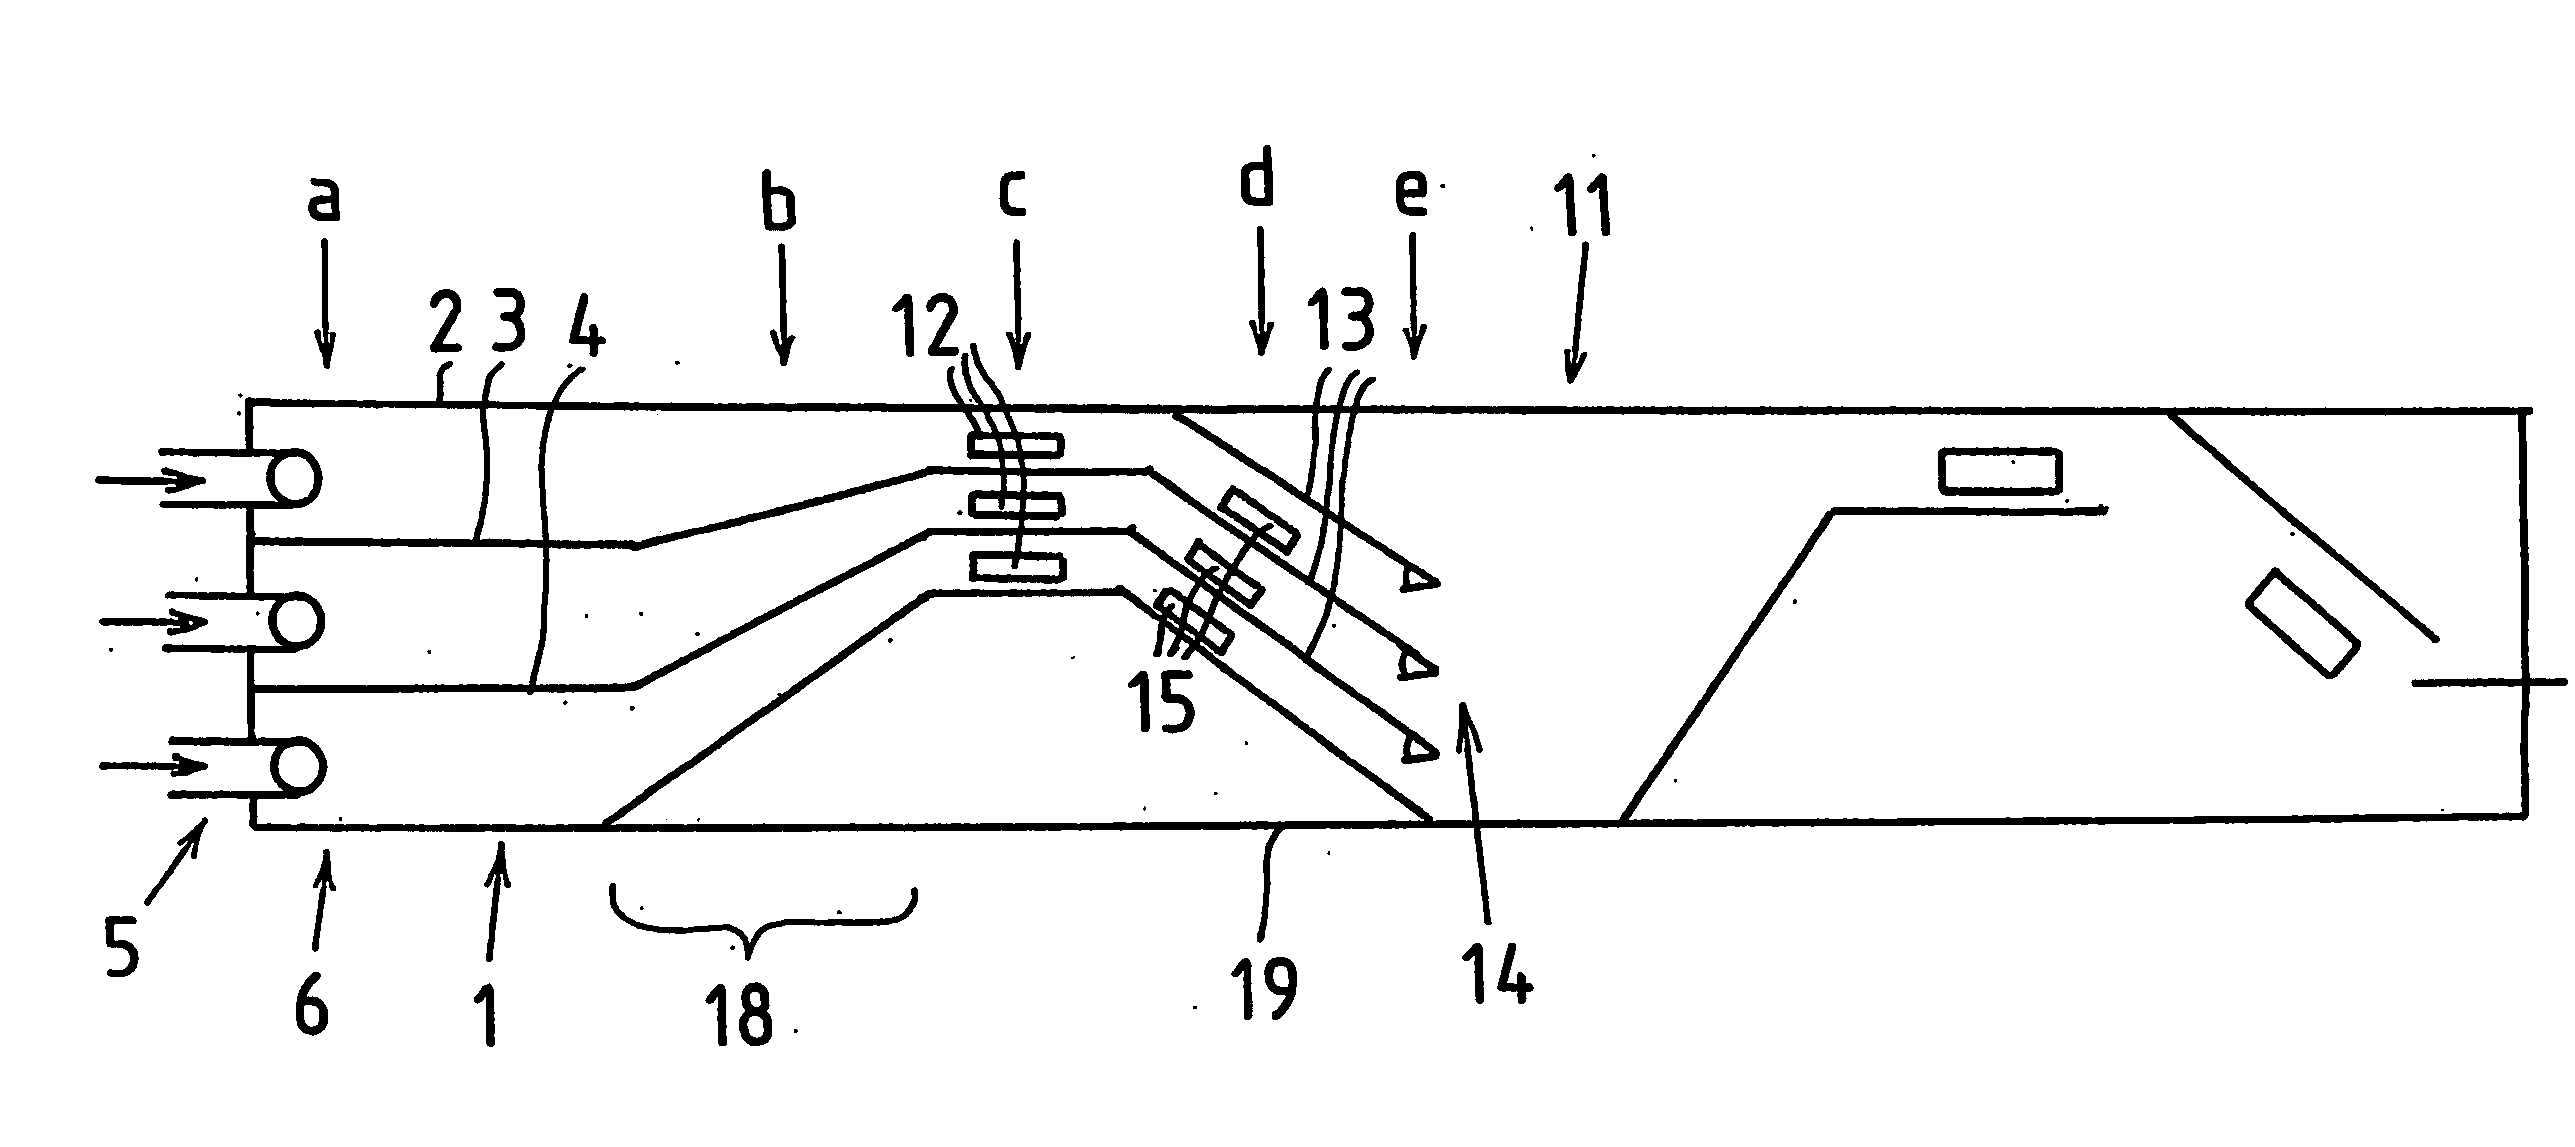 Sorting Device and Method